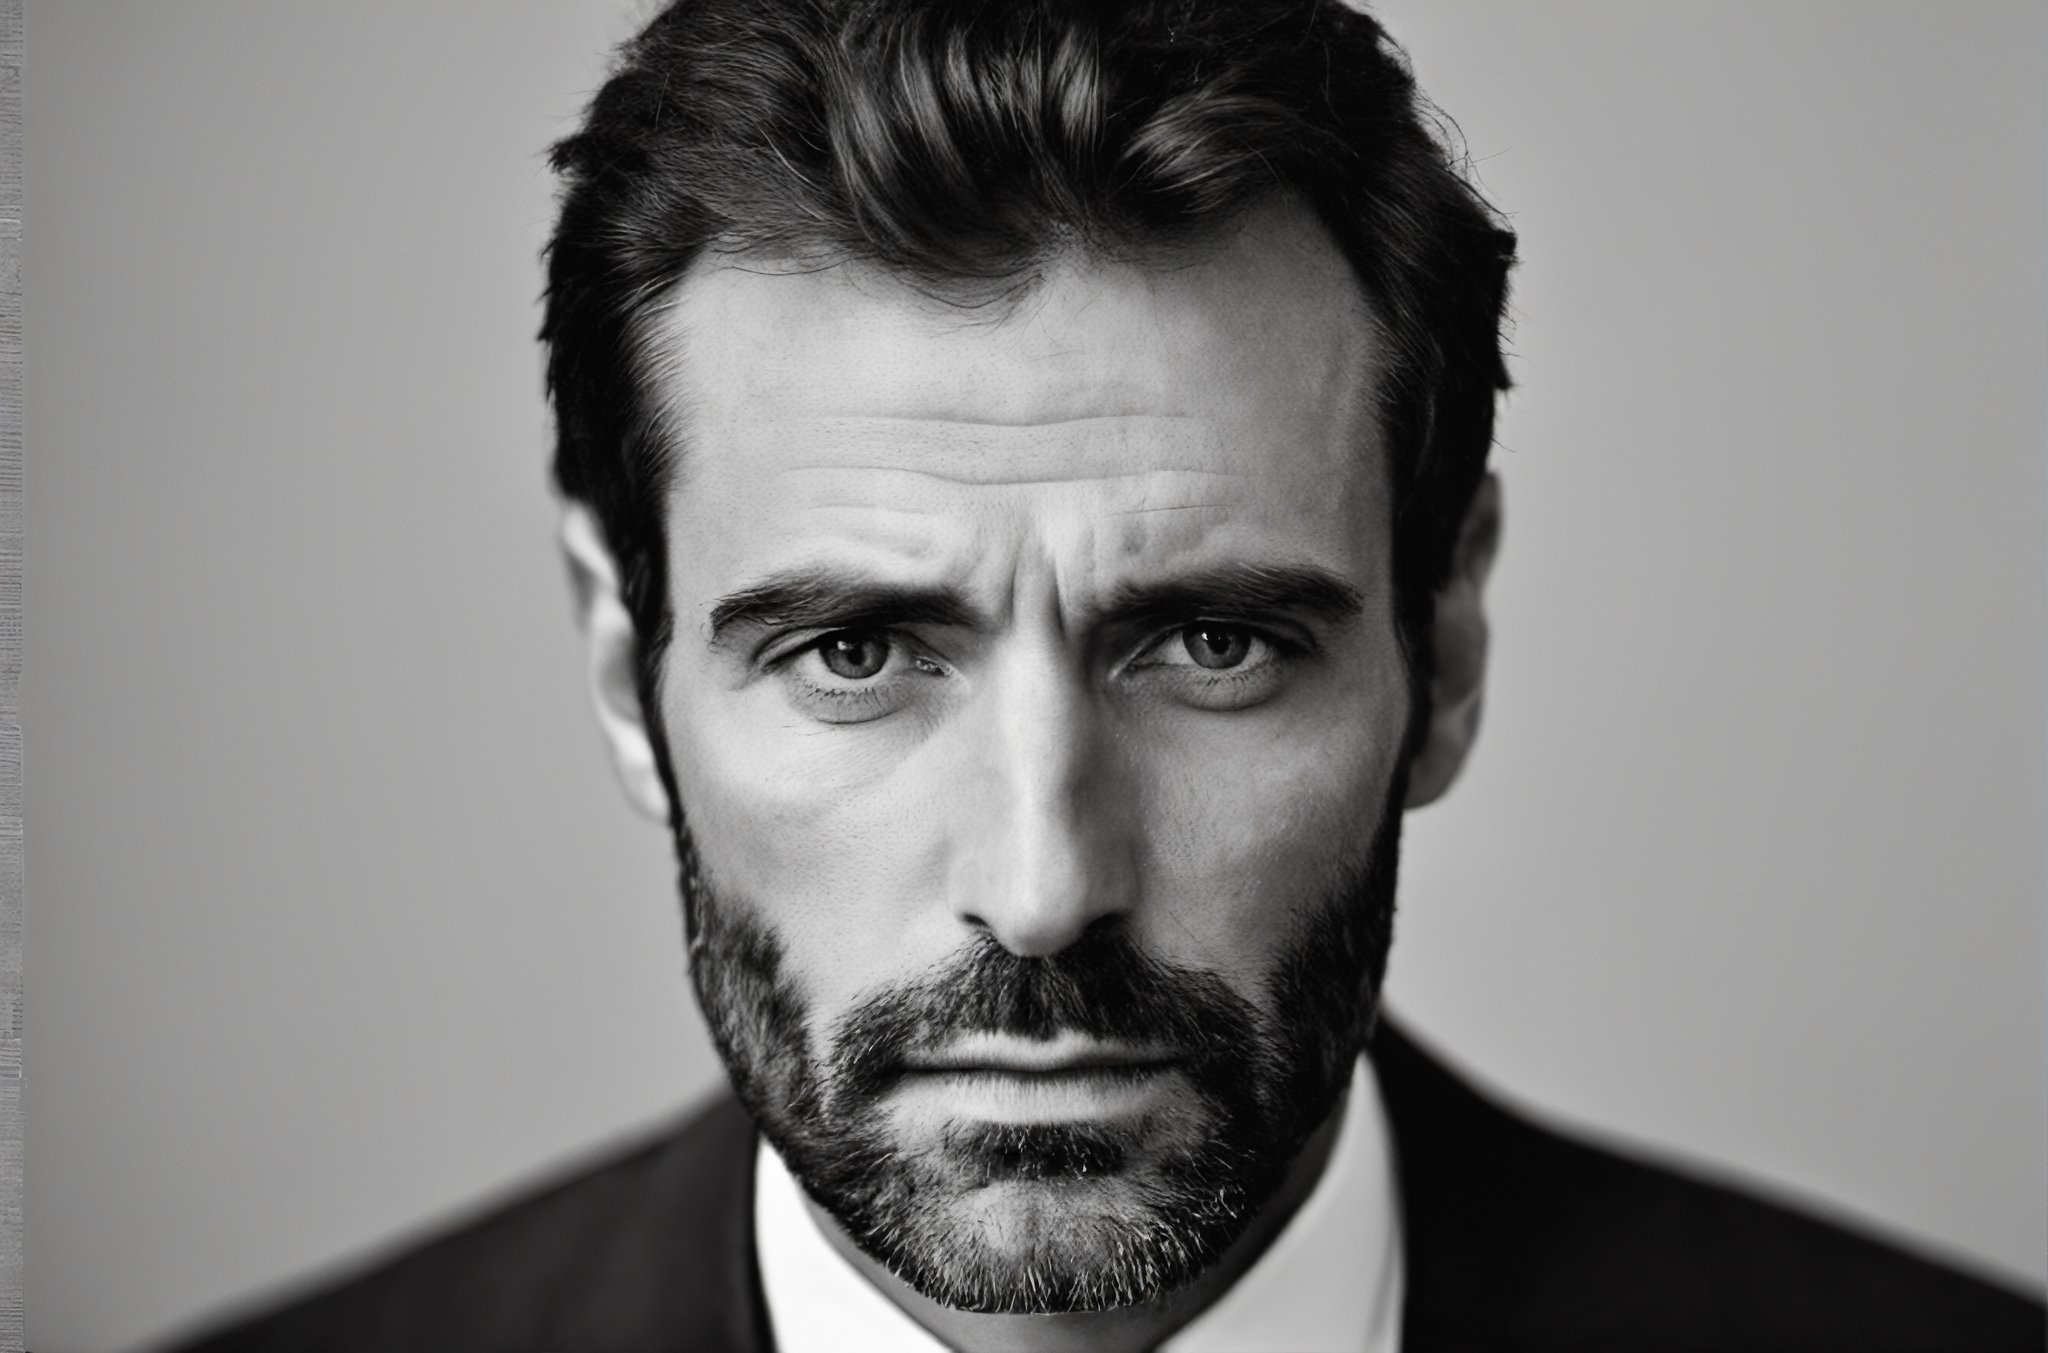 Generate an image that captures the essence of this description: The image is a black and white photo of a man with a serious expression on his face, looking directly into the camera. He has a thin beard and appears to be well-dressed. The man's gaze is fixed and intense, as if he is staring into the depths of space or contemplating something important. The overall mood of the image is quite serious and contemplative. The lack of color in the photograph adds to the dramatic effect and draws attention to the subject's facial expression and demeanor





